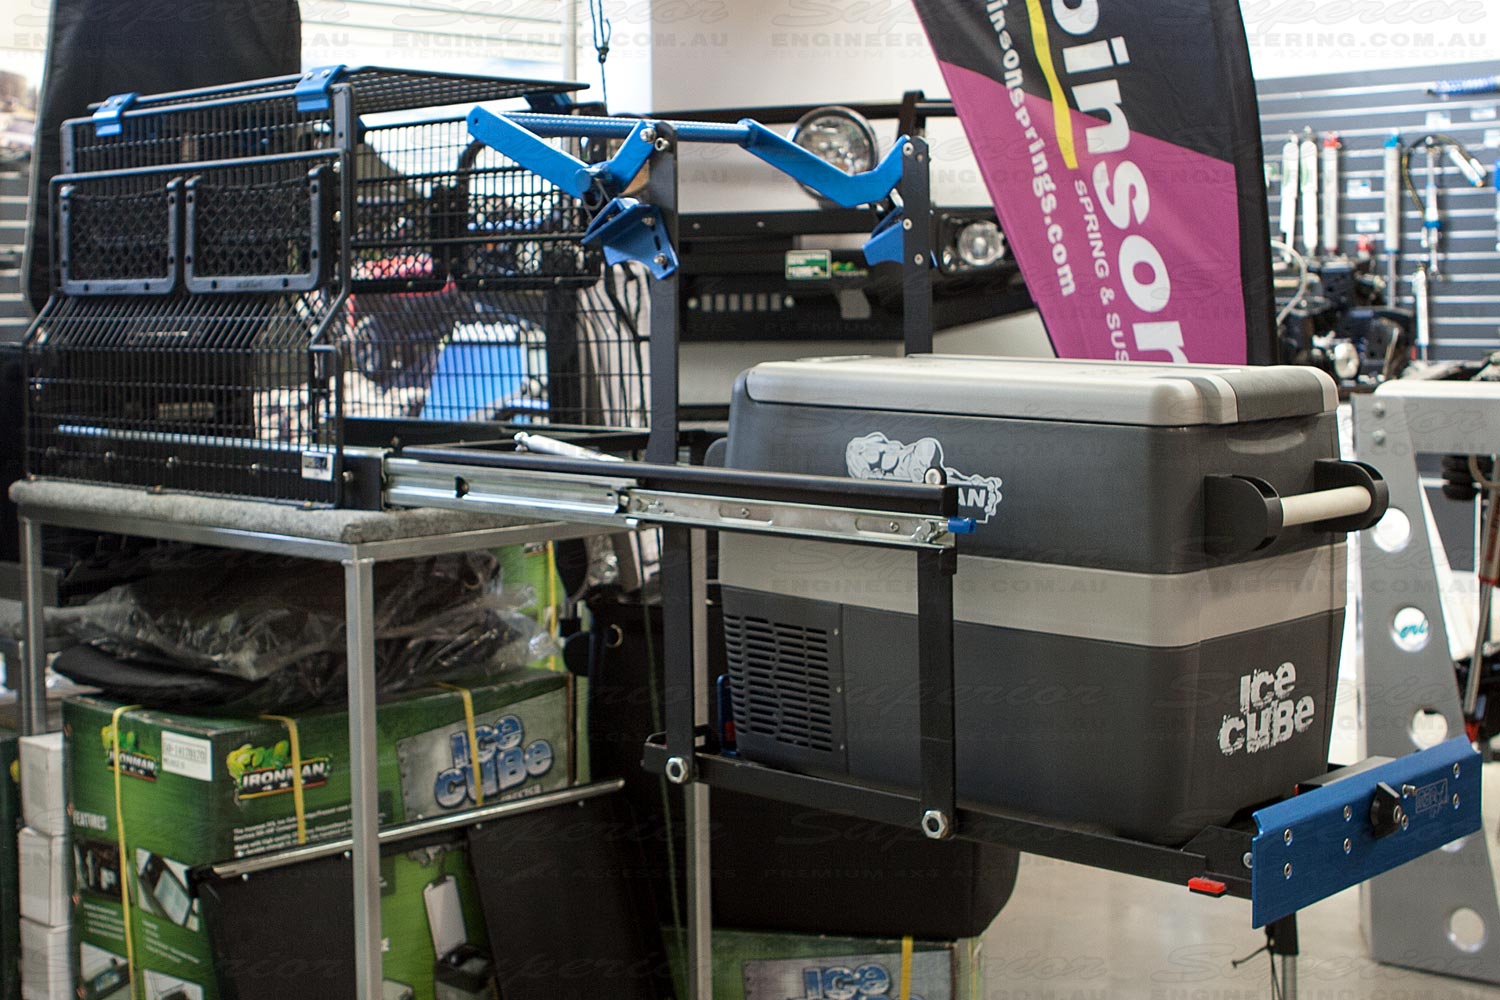 In-store display of the MSA 4x4 Fridge Drop Slide prior to opening